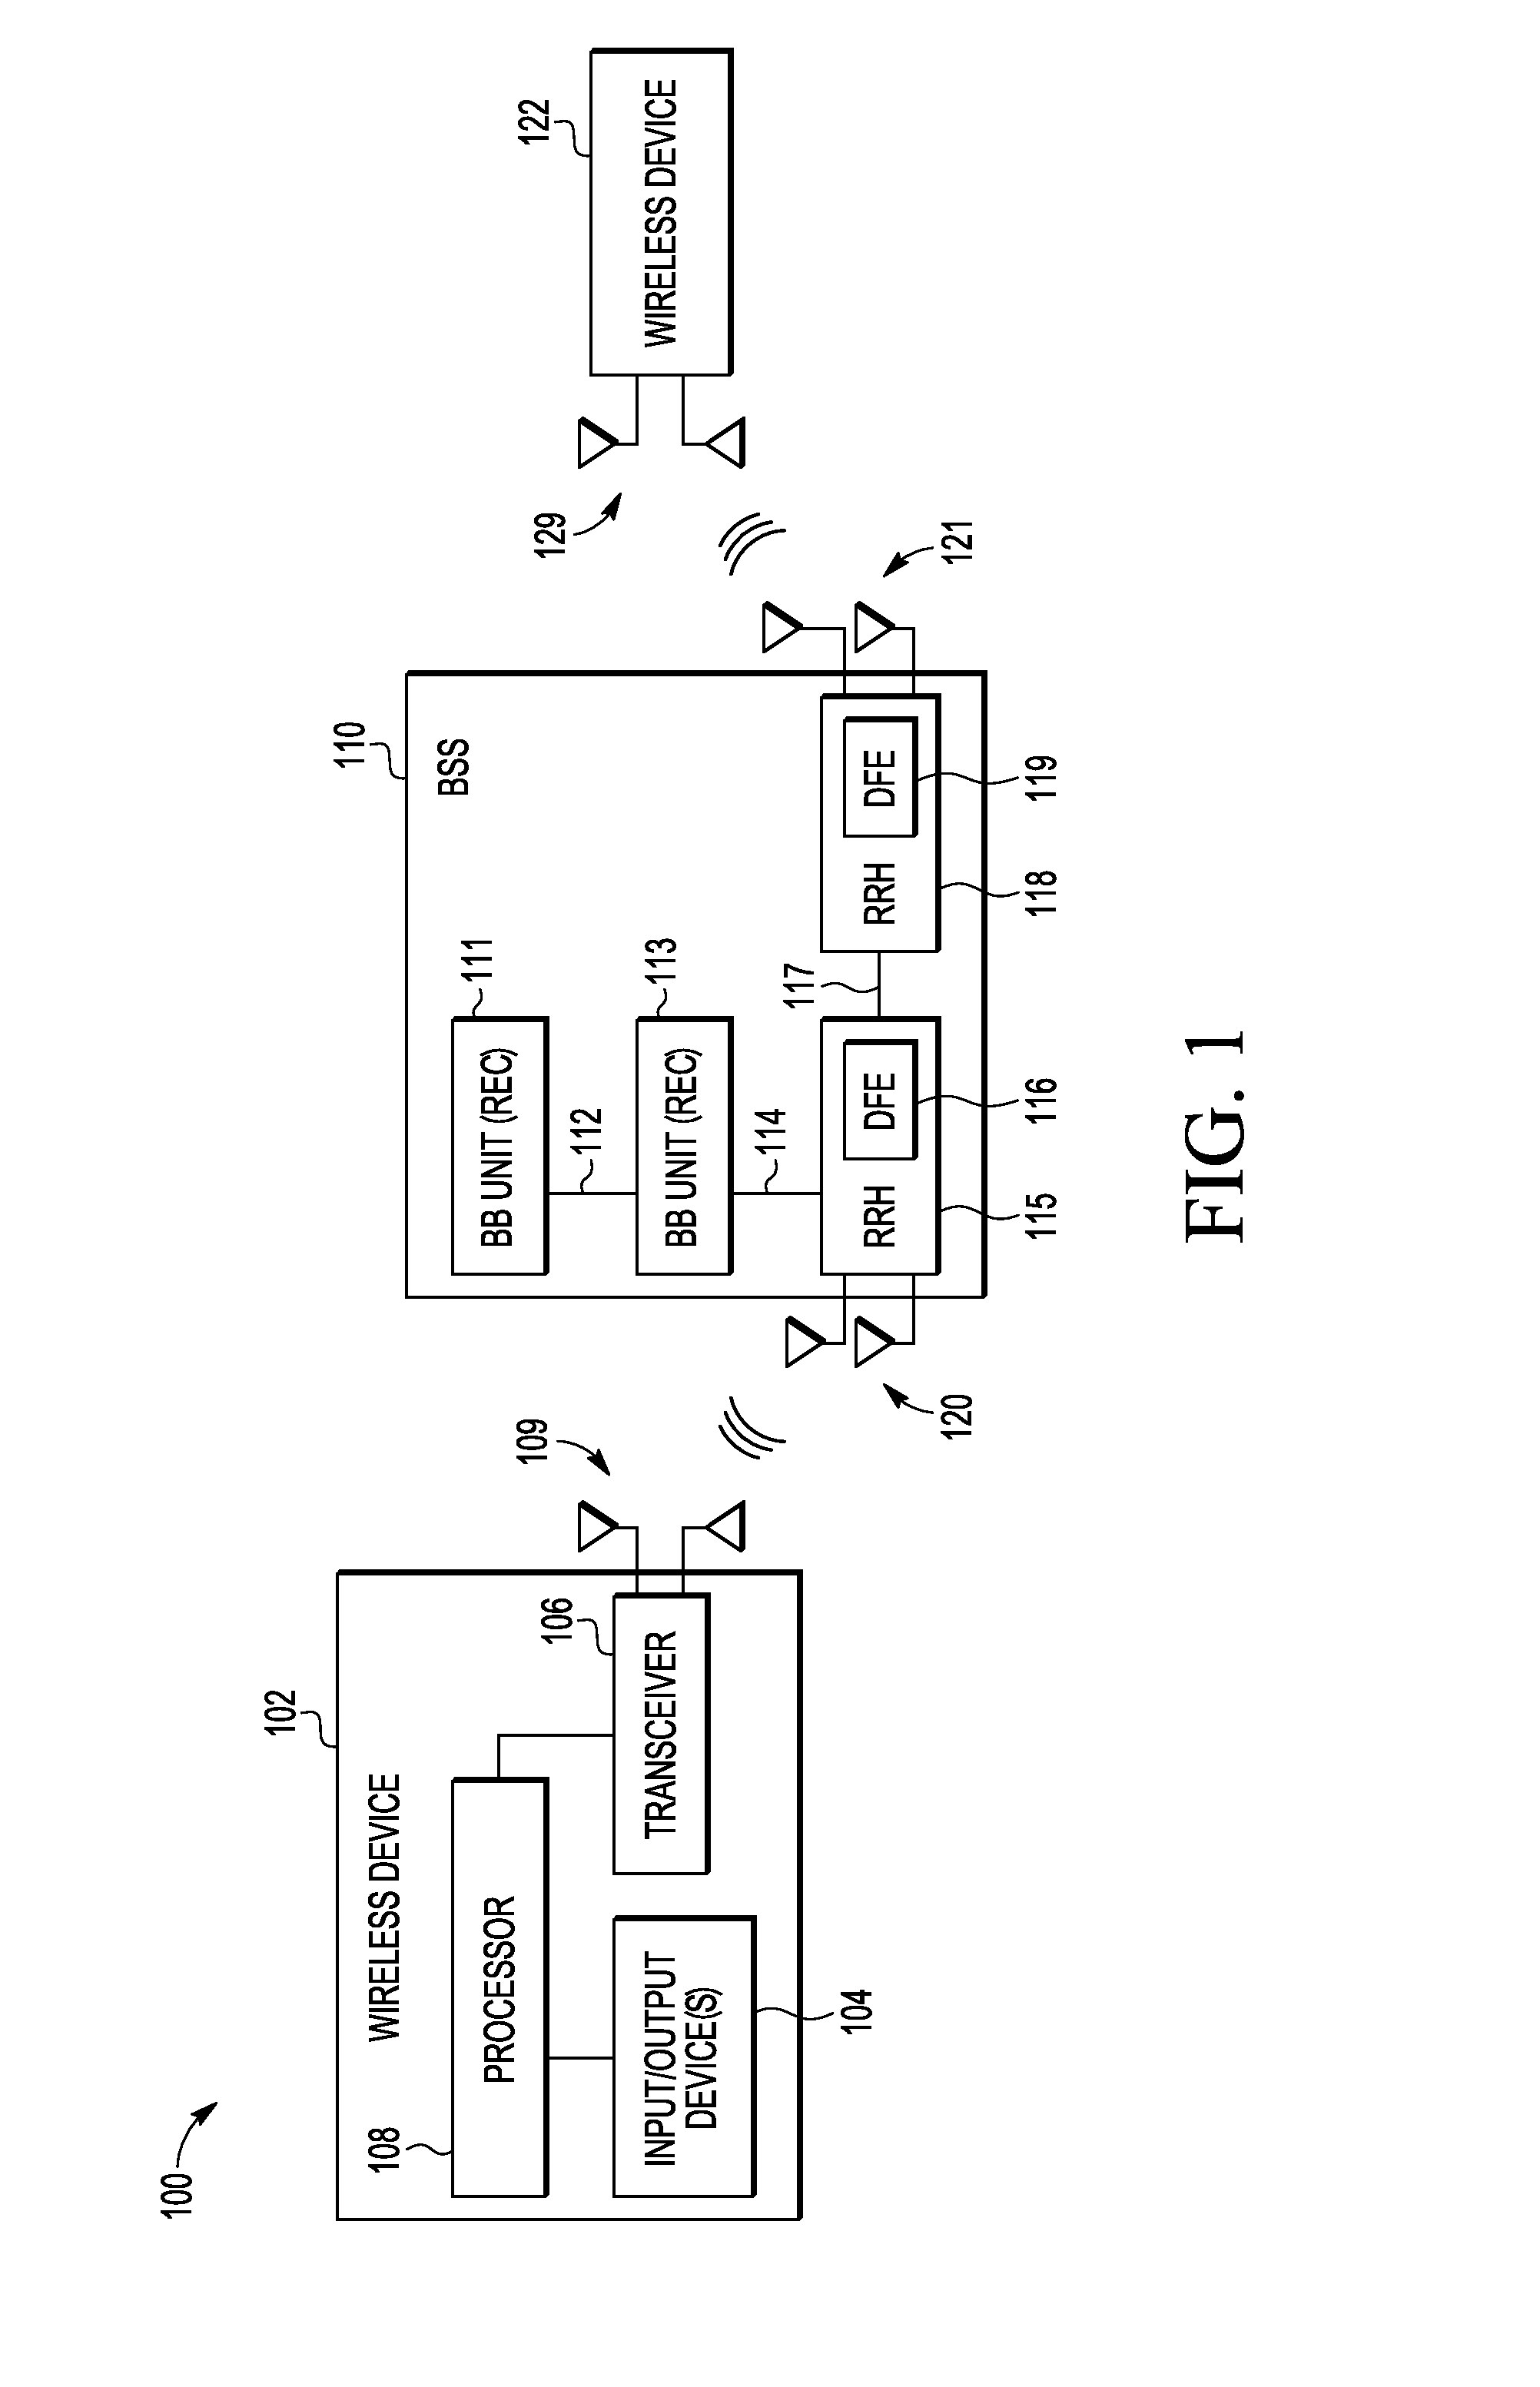 Method and System for Automatically Controlling the Insertion of Control Word in CPRI Daisy Chain Configuration